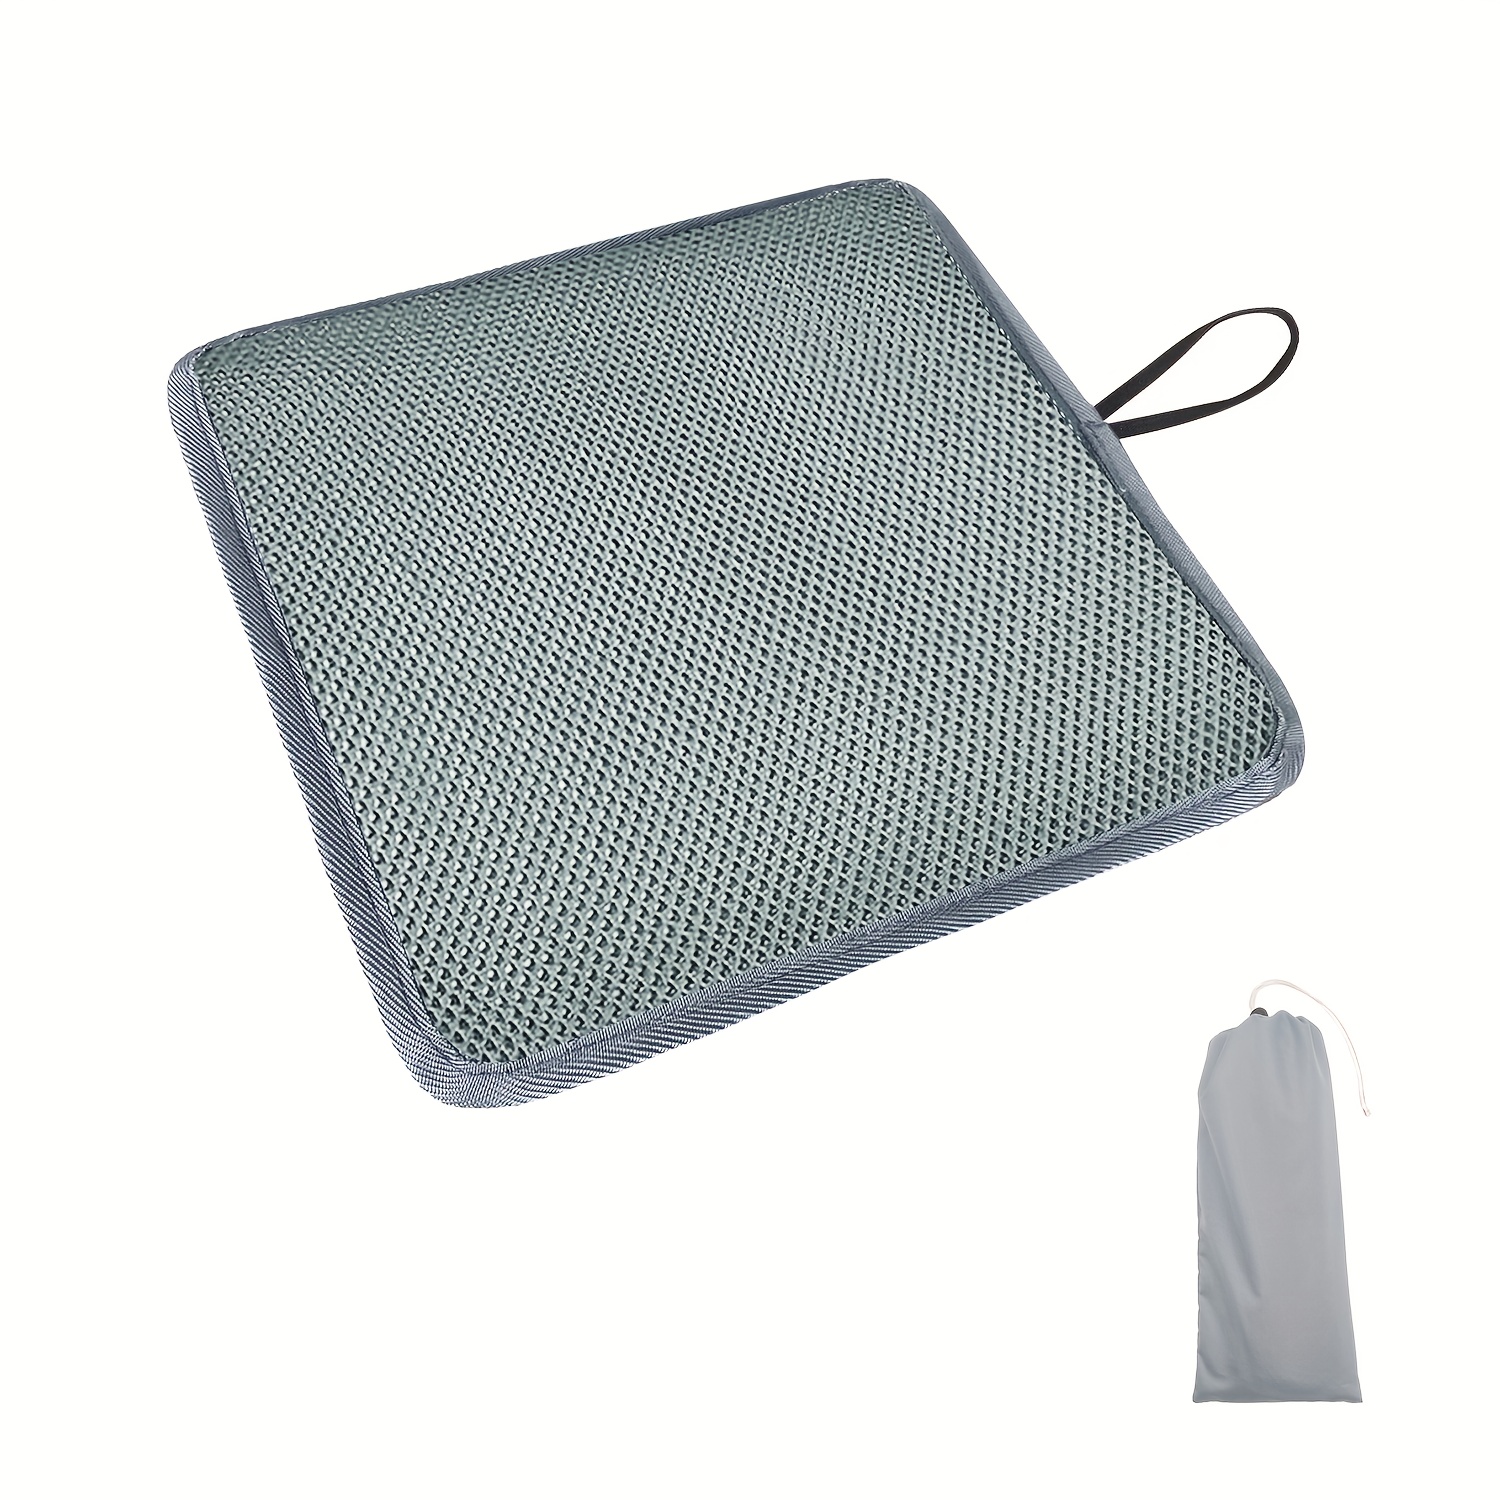 Gel Memory Foam Seat Cushion with Chair Ties - Orthopedic Seat Pad for  Office, Car, Truck, and Wheelchair - Cooling Comfort, Portable, Pressure  Relief